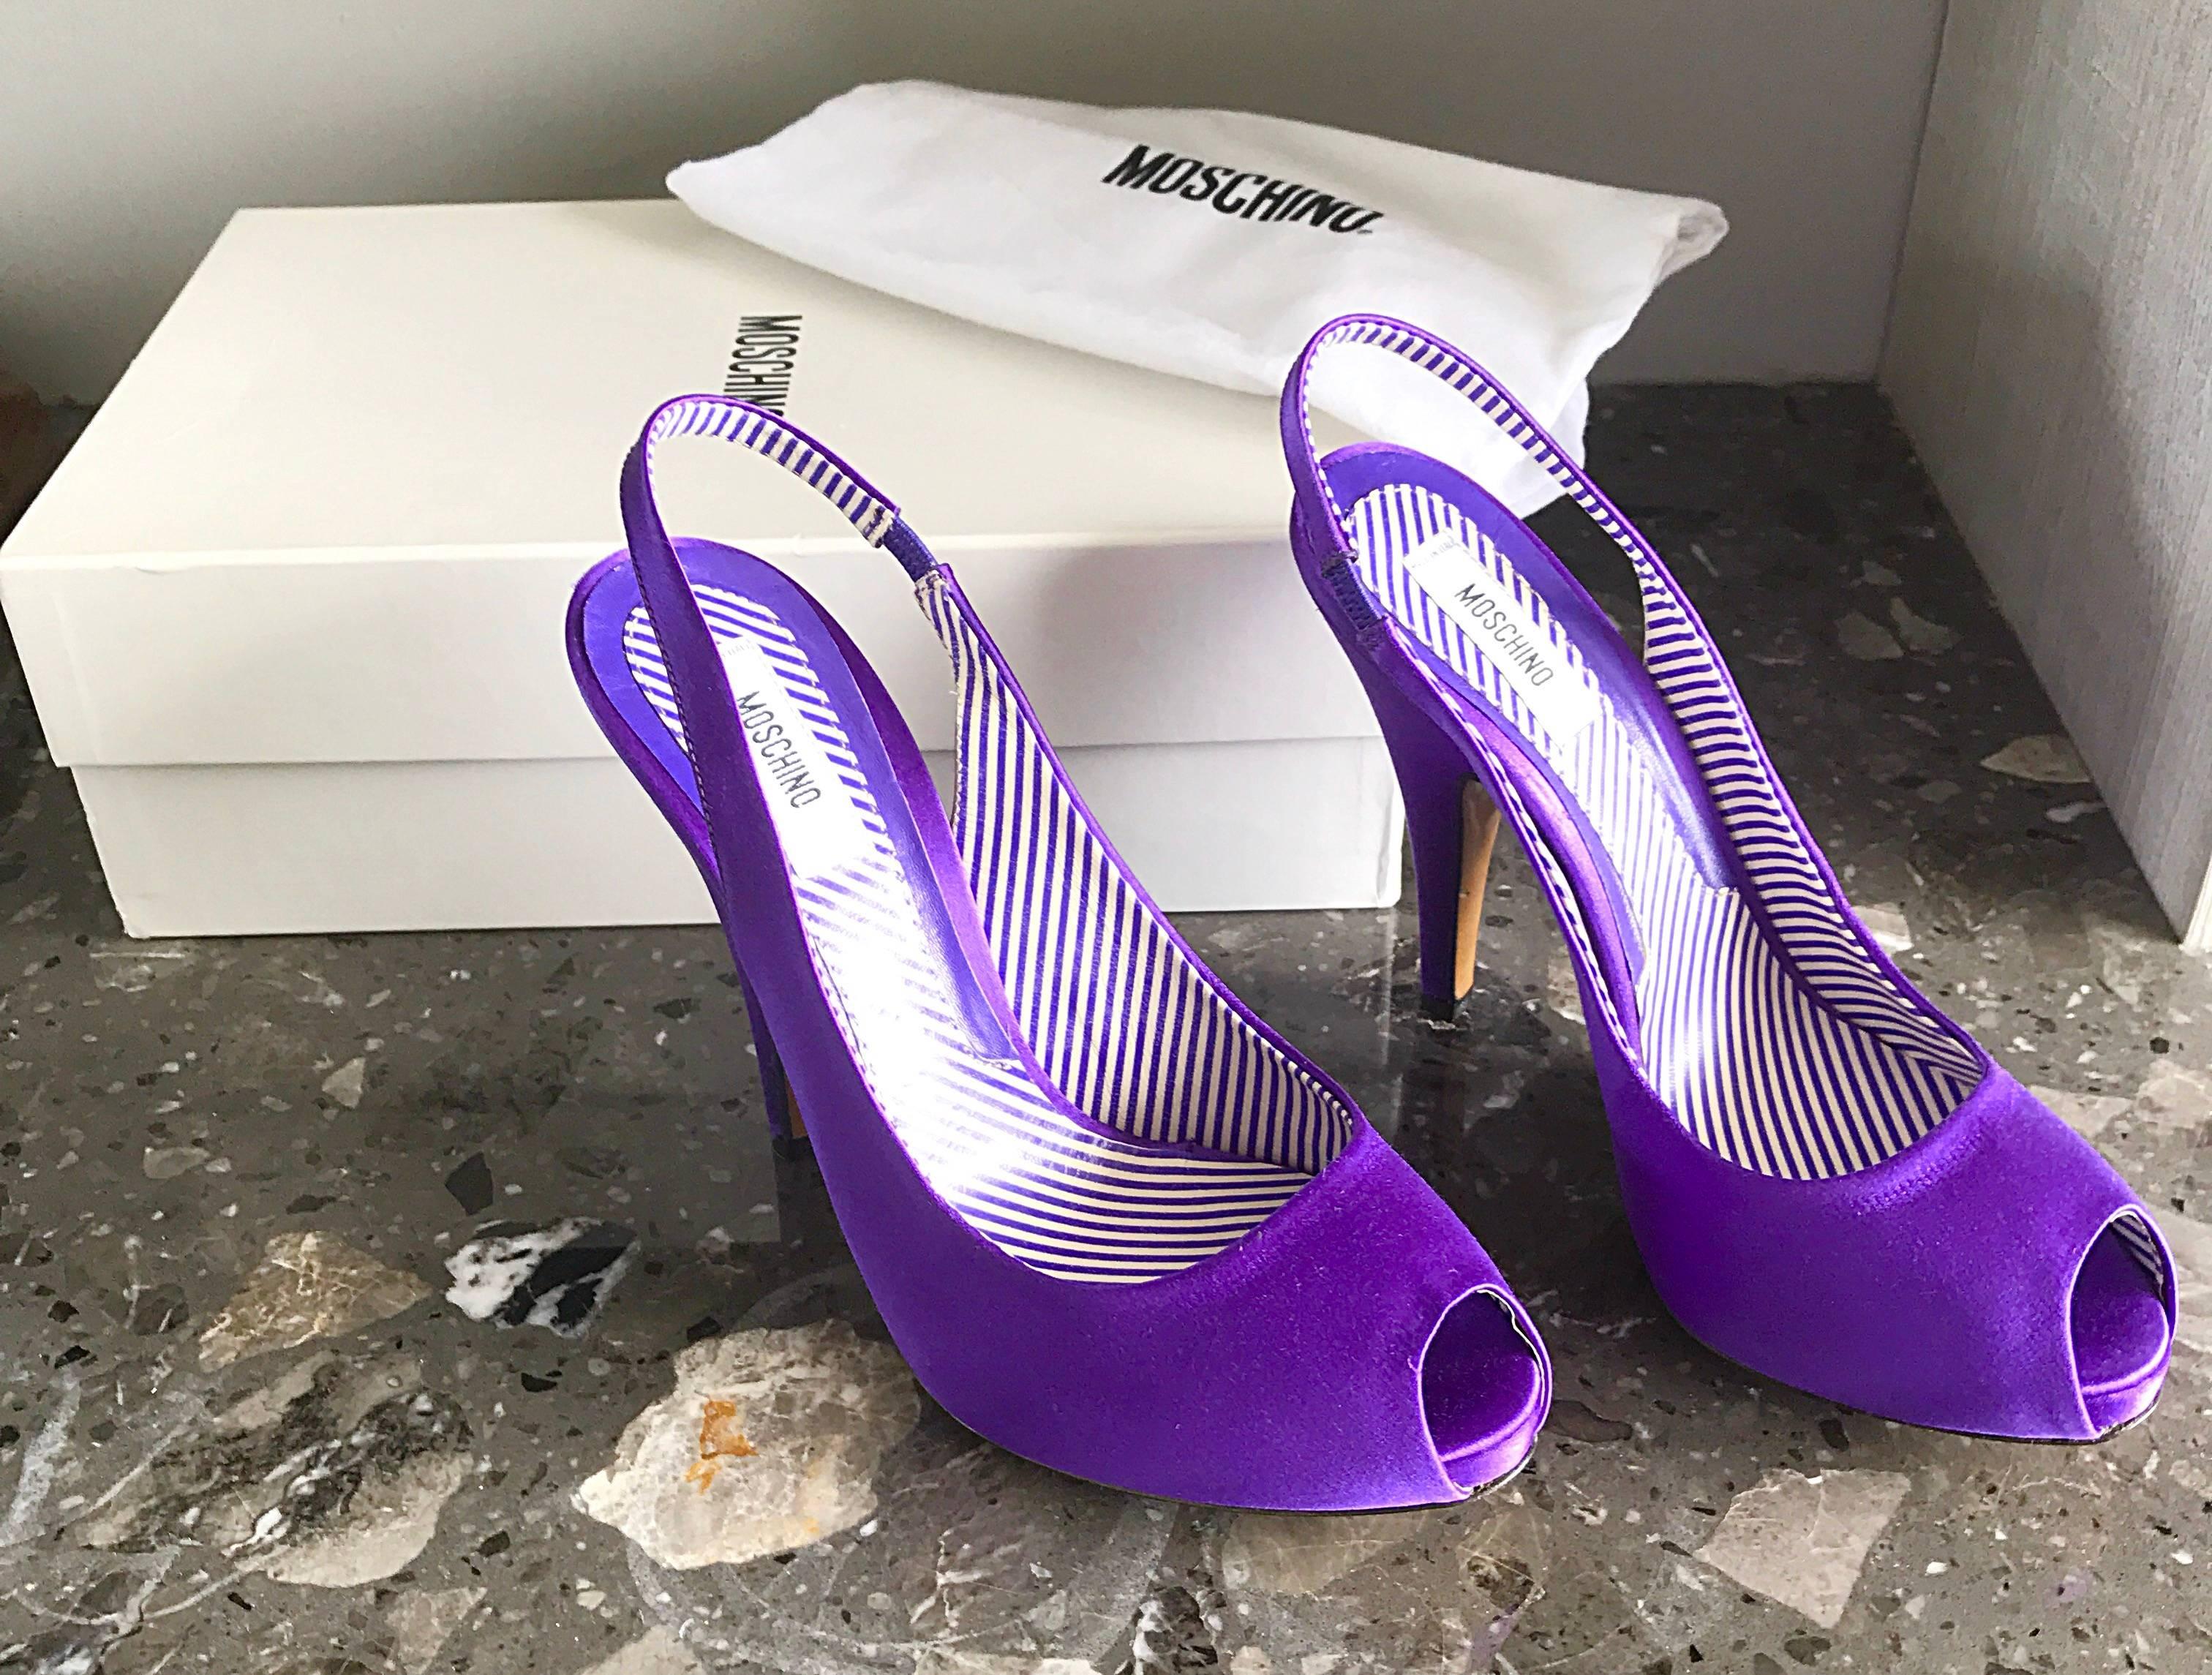 Gorgeous brand new in box MOSCHINO peep toe sling back high heels! Features a regal purple color on luxurious silk satin. Hidden platform adds extra comfort. Leather sole, with side elastic bands at each back strap. Adds a pop of color to any